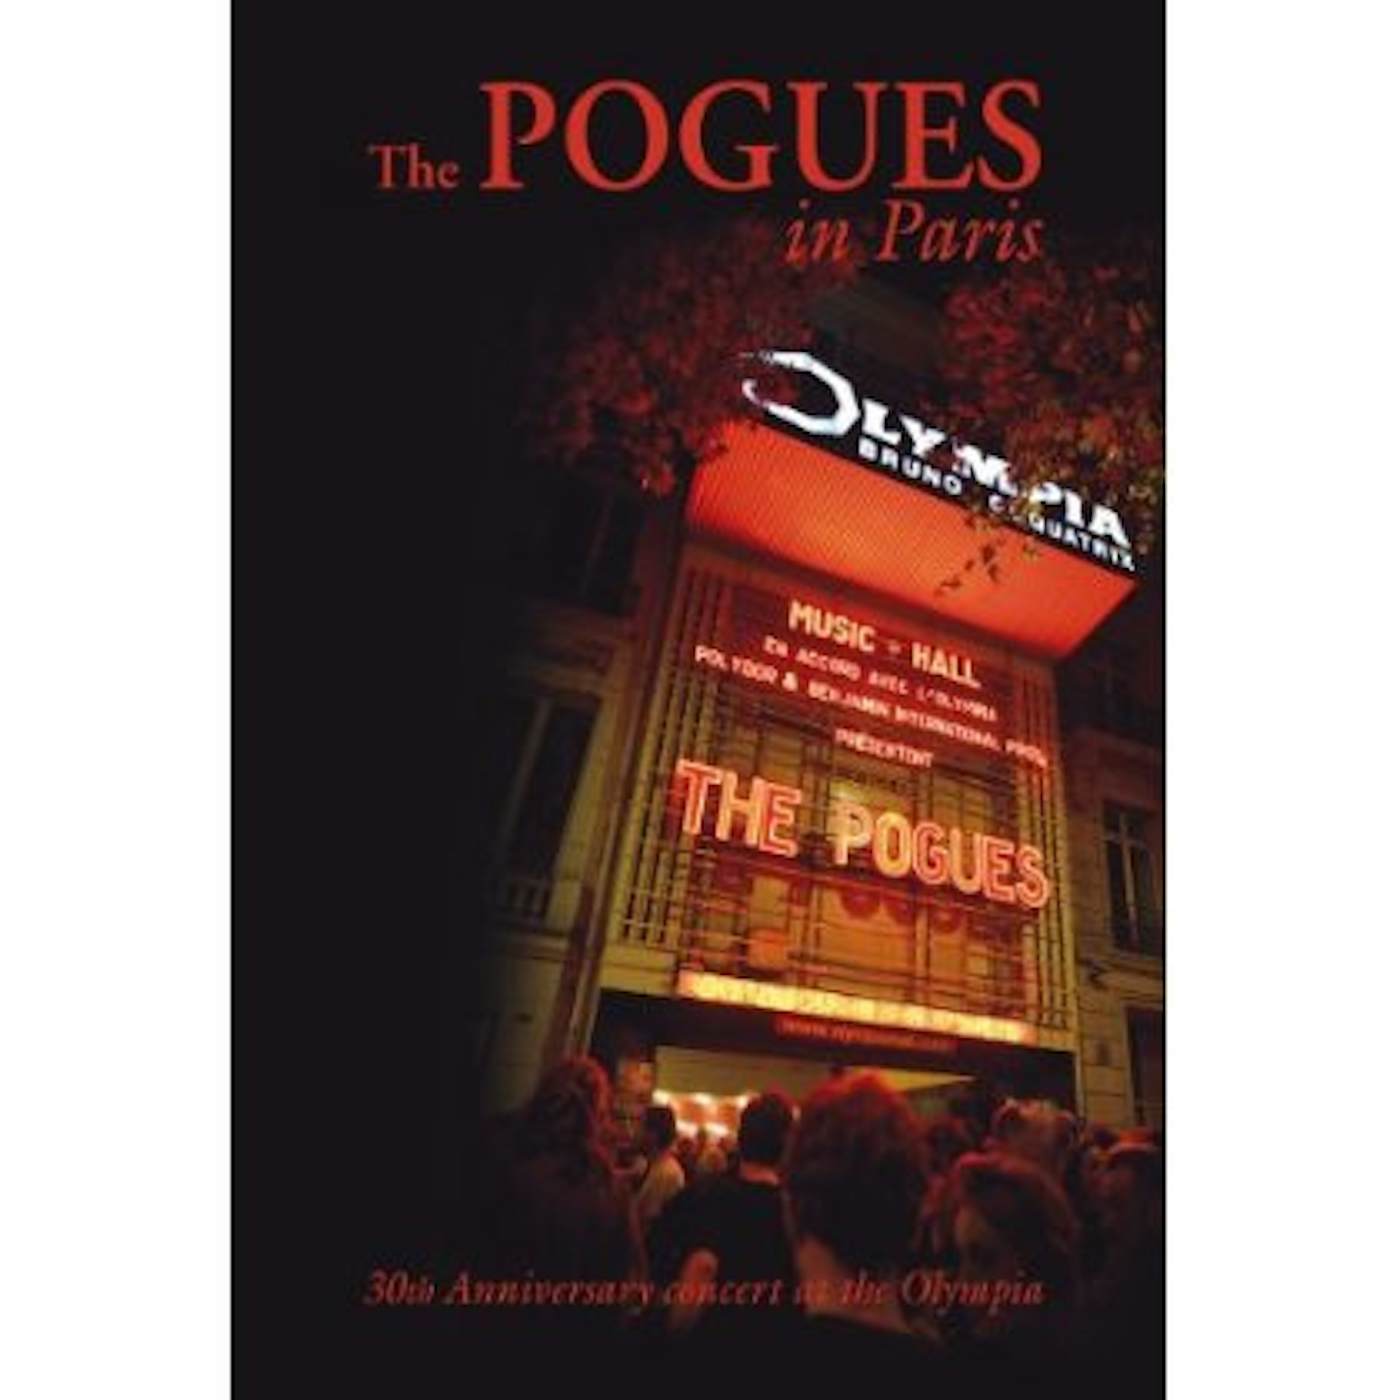 The Pogues IN PARIS: 30TH ANNIVERSARY CONCERT CD